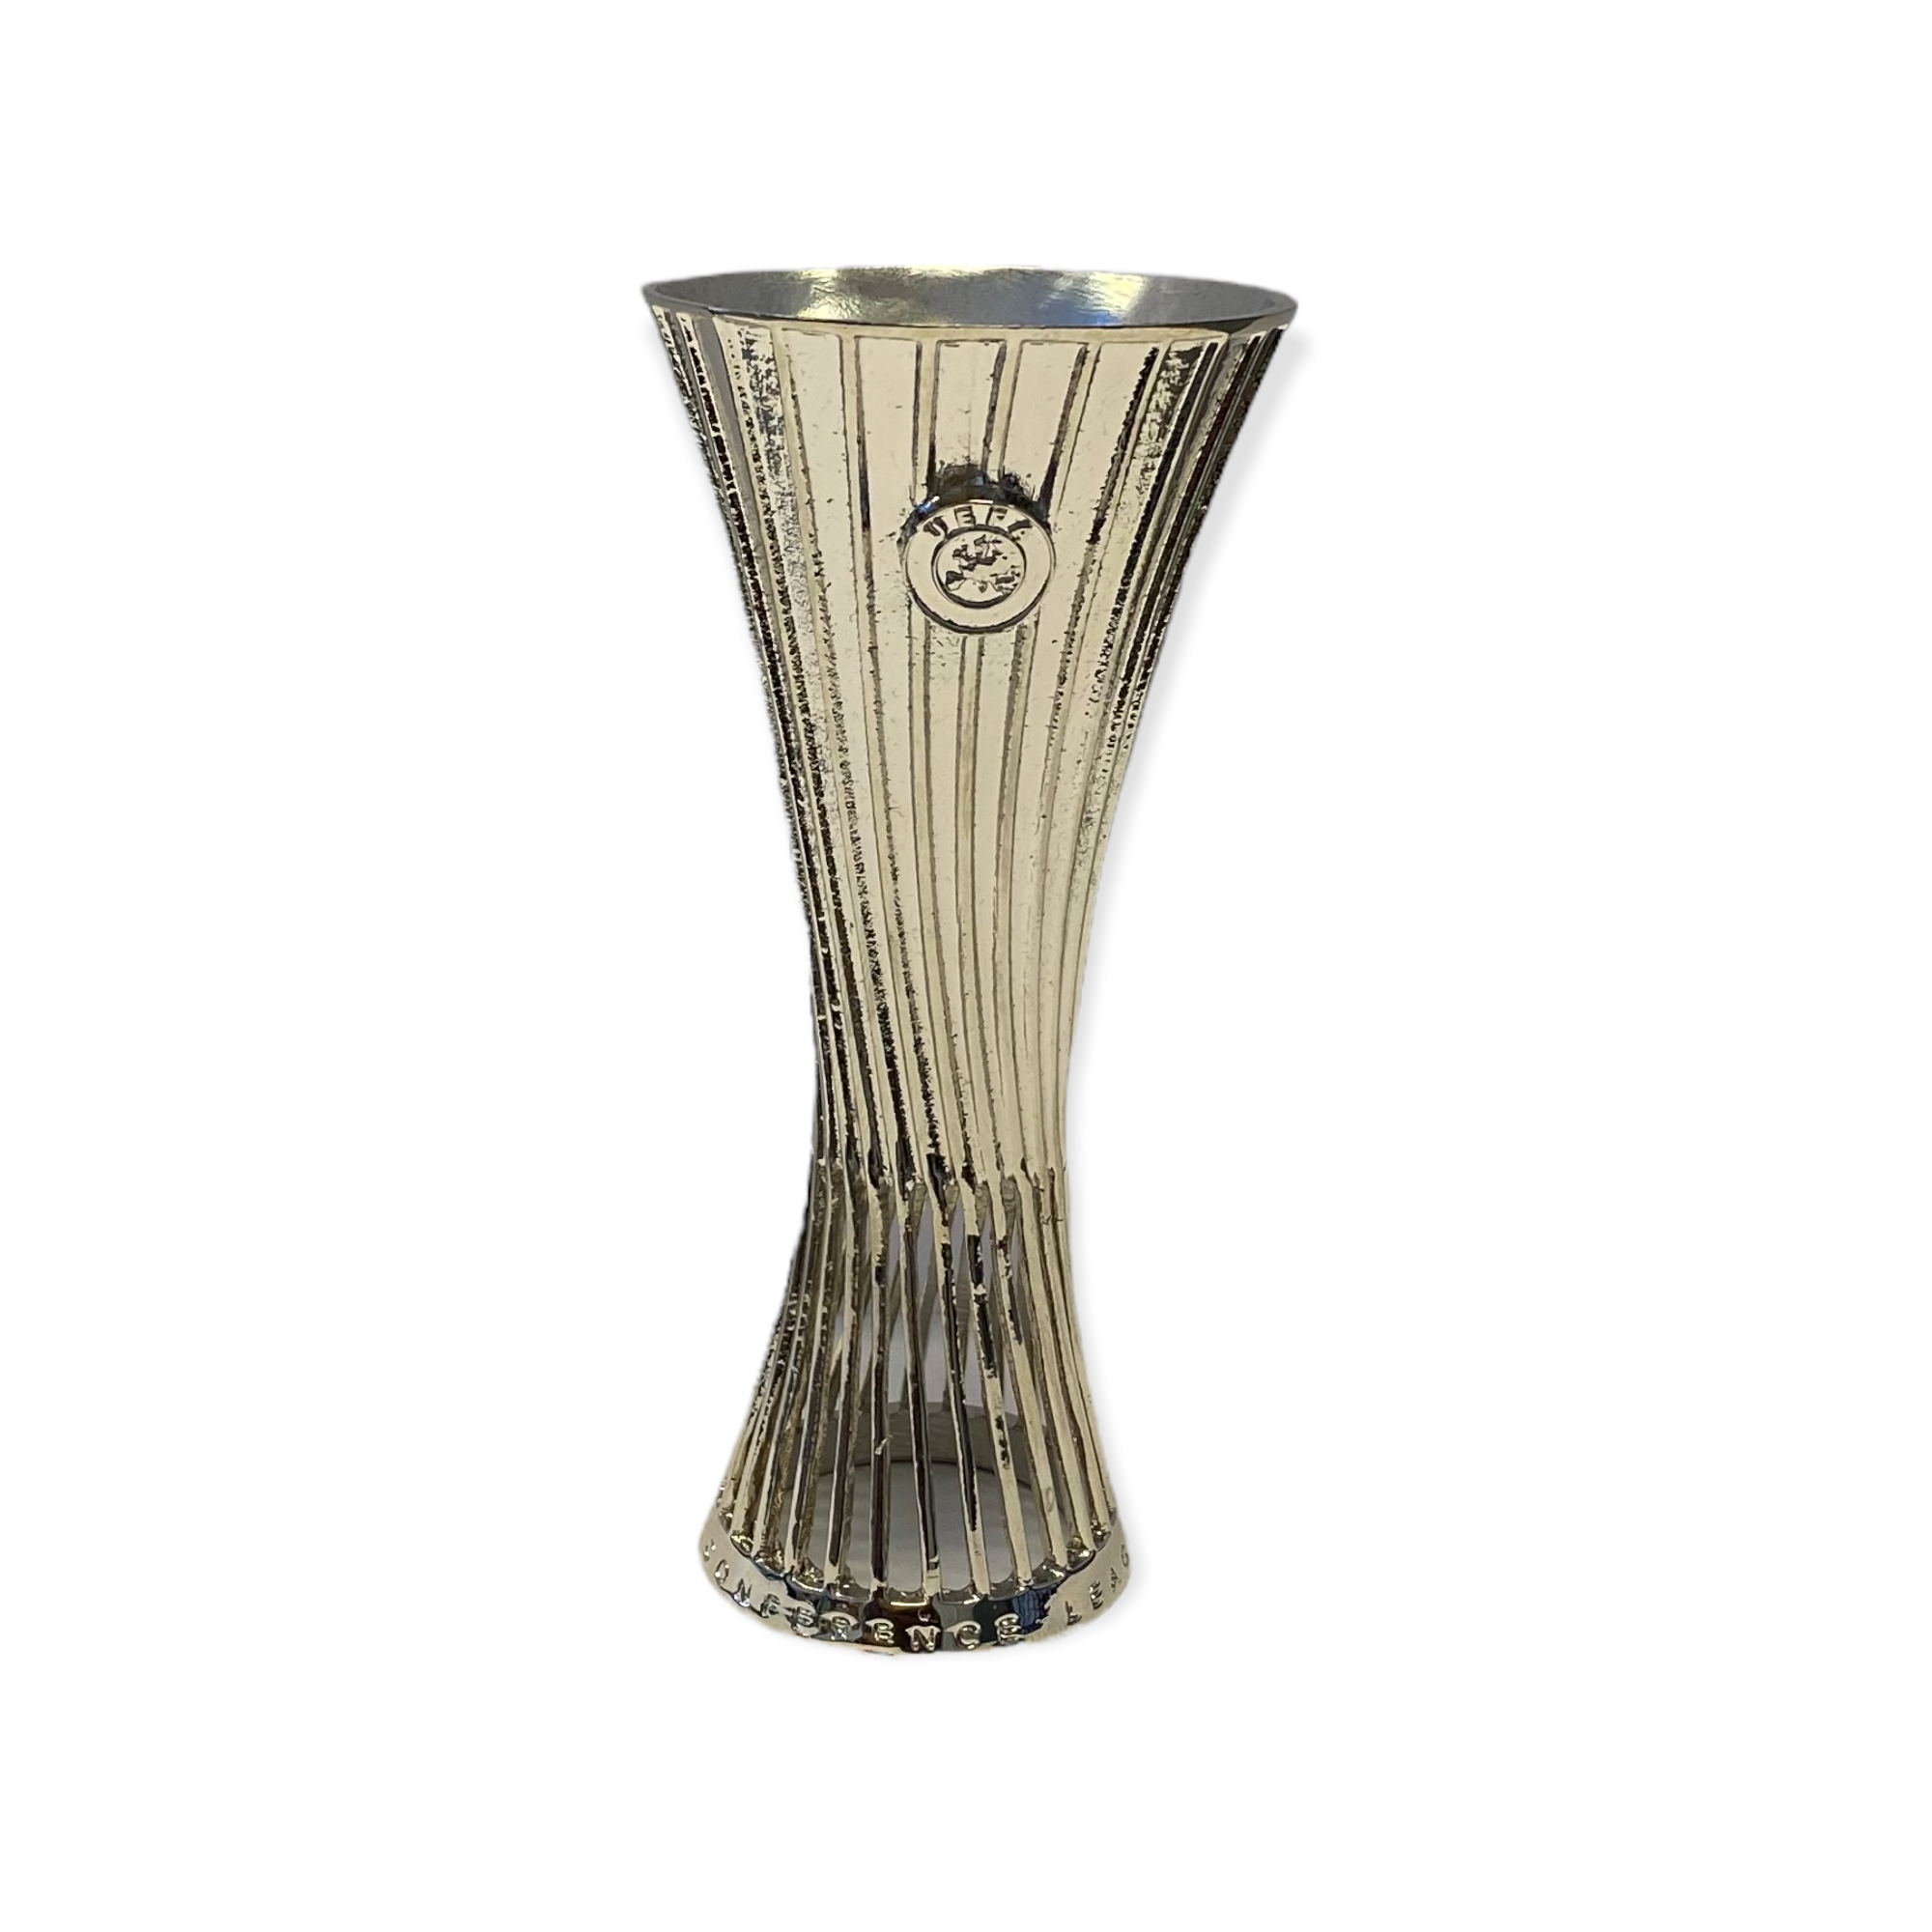 UEFA Europa Conference League 100mm Trophy UEFA Club Competitions Online Store